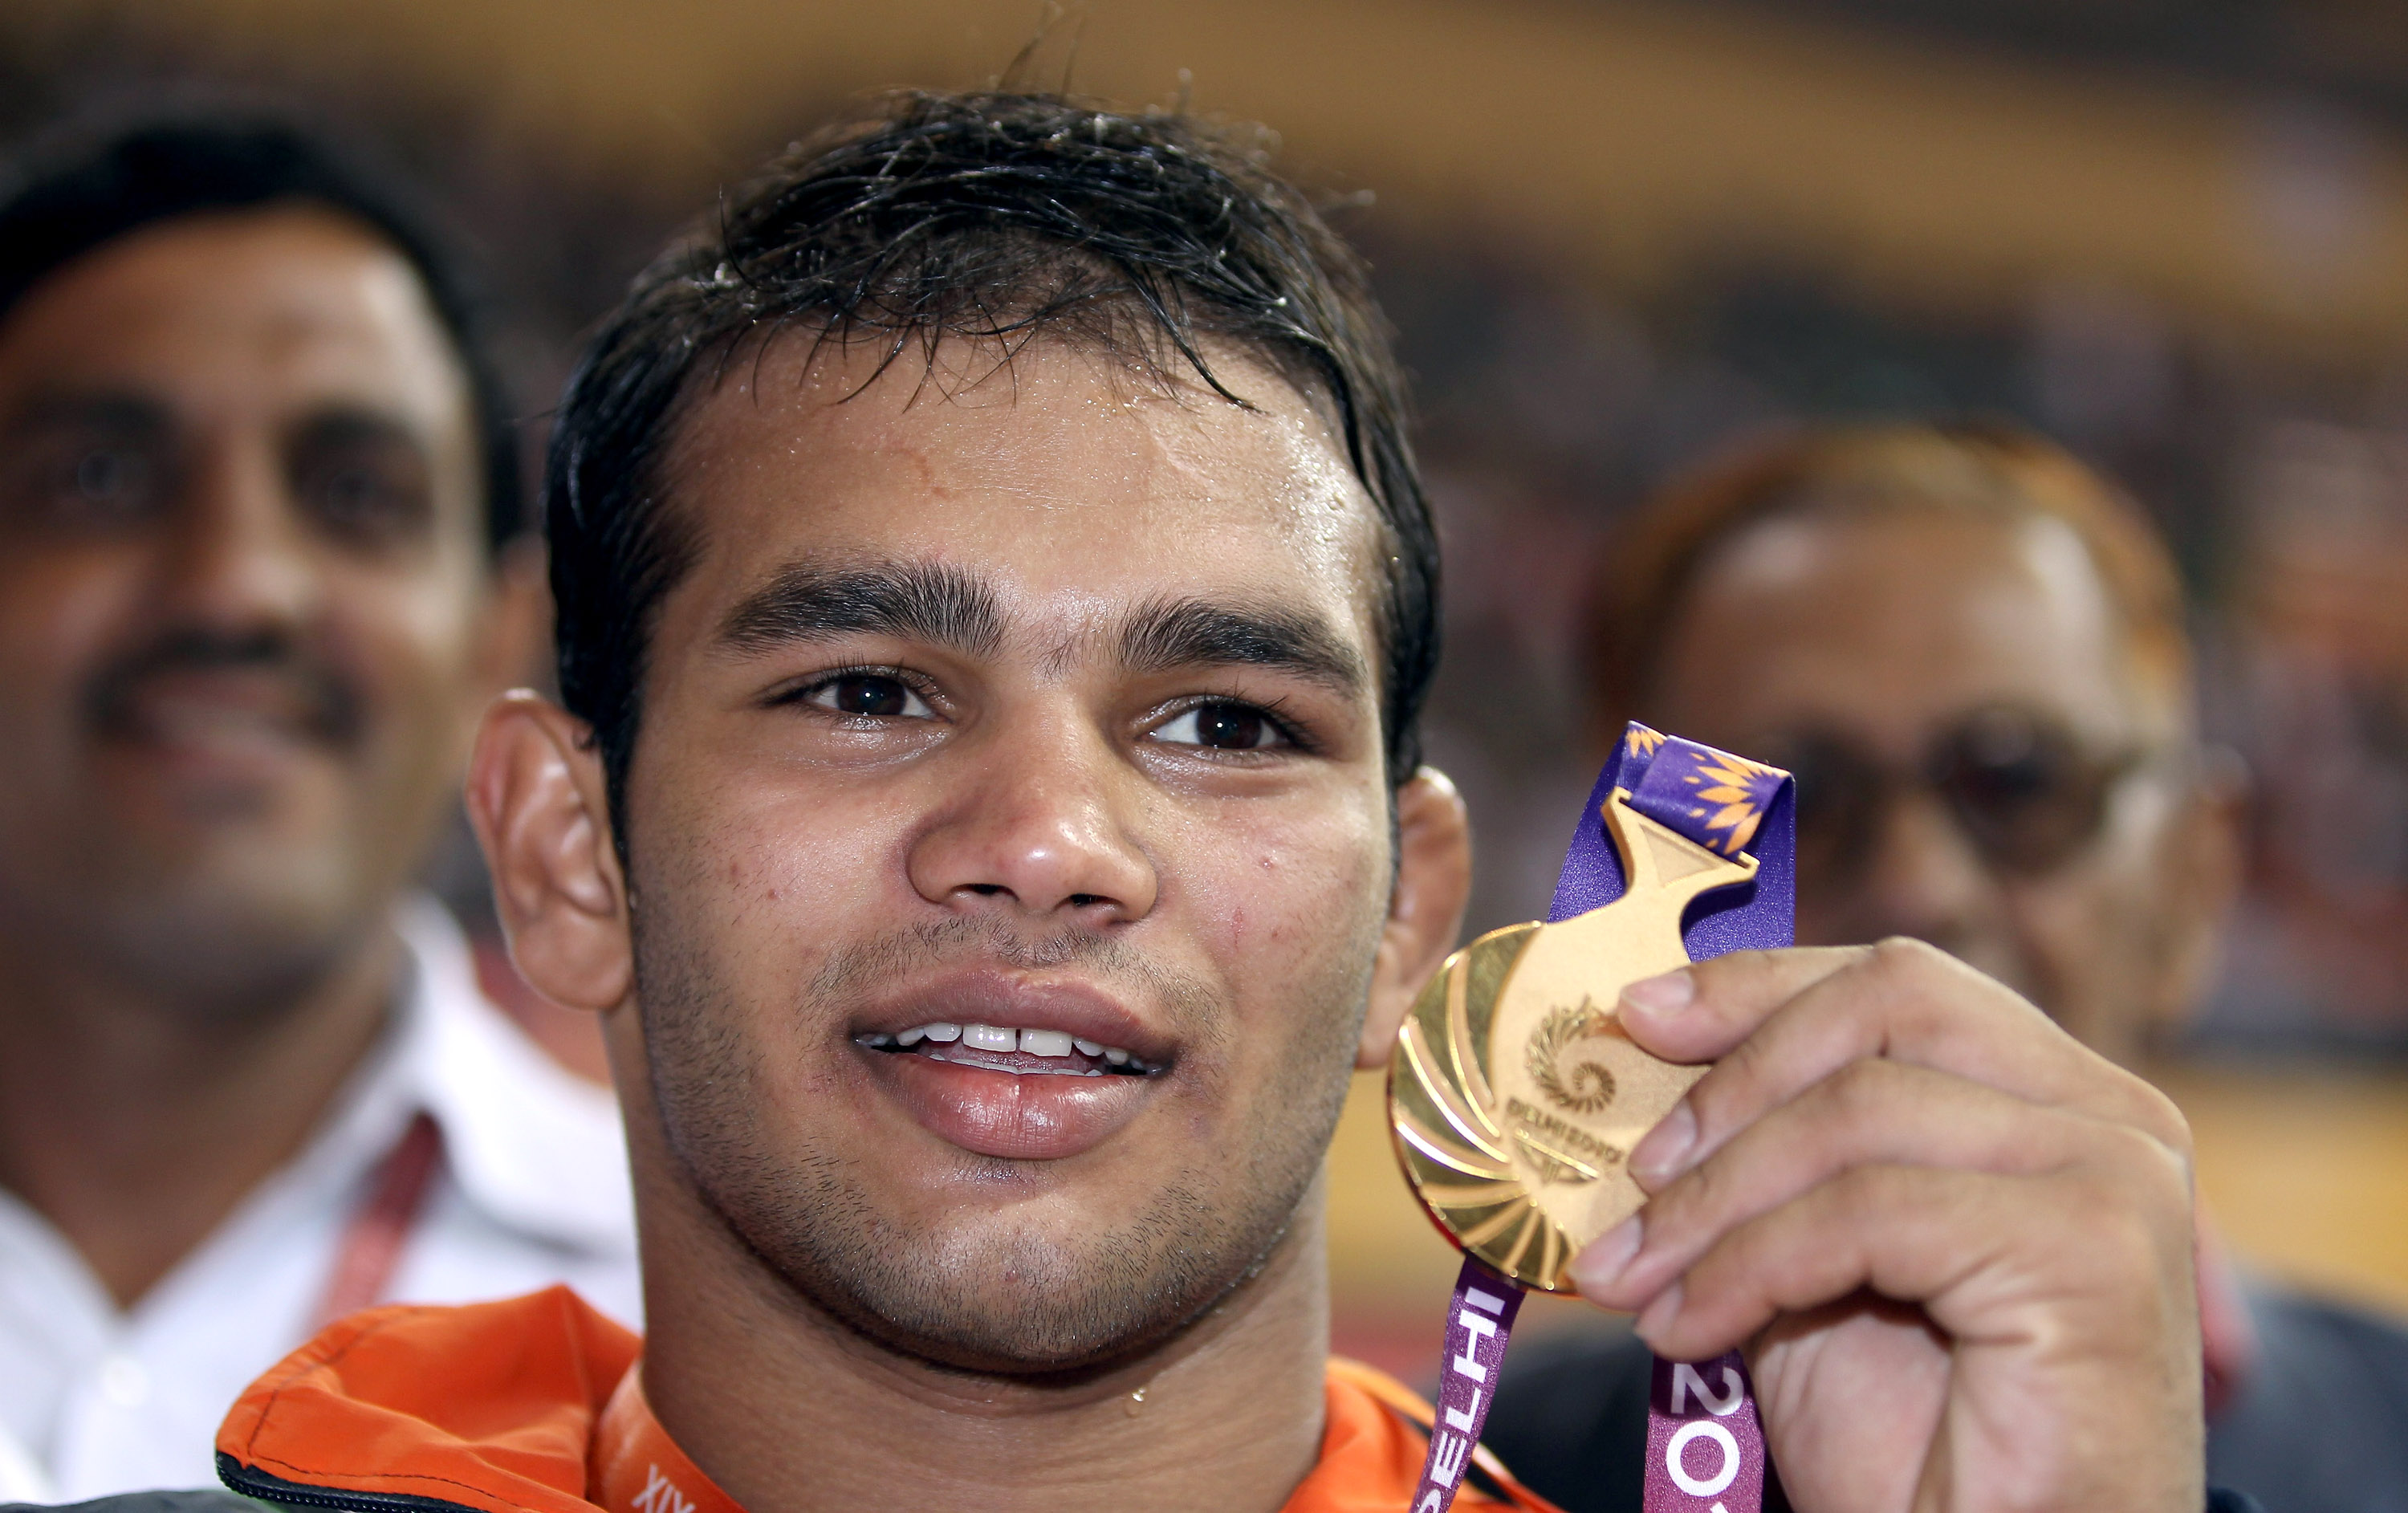 Narsingh was beaten by his compatriots, says IOA Chief